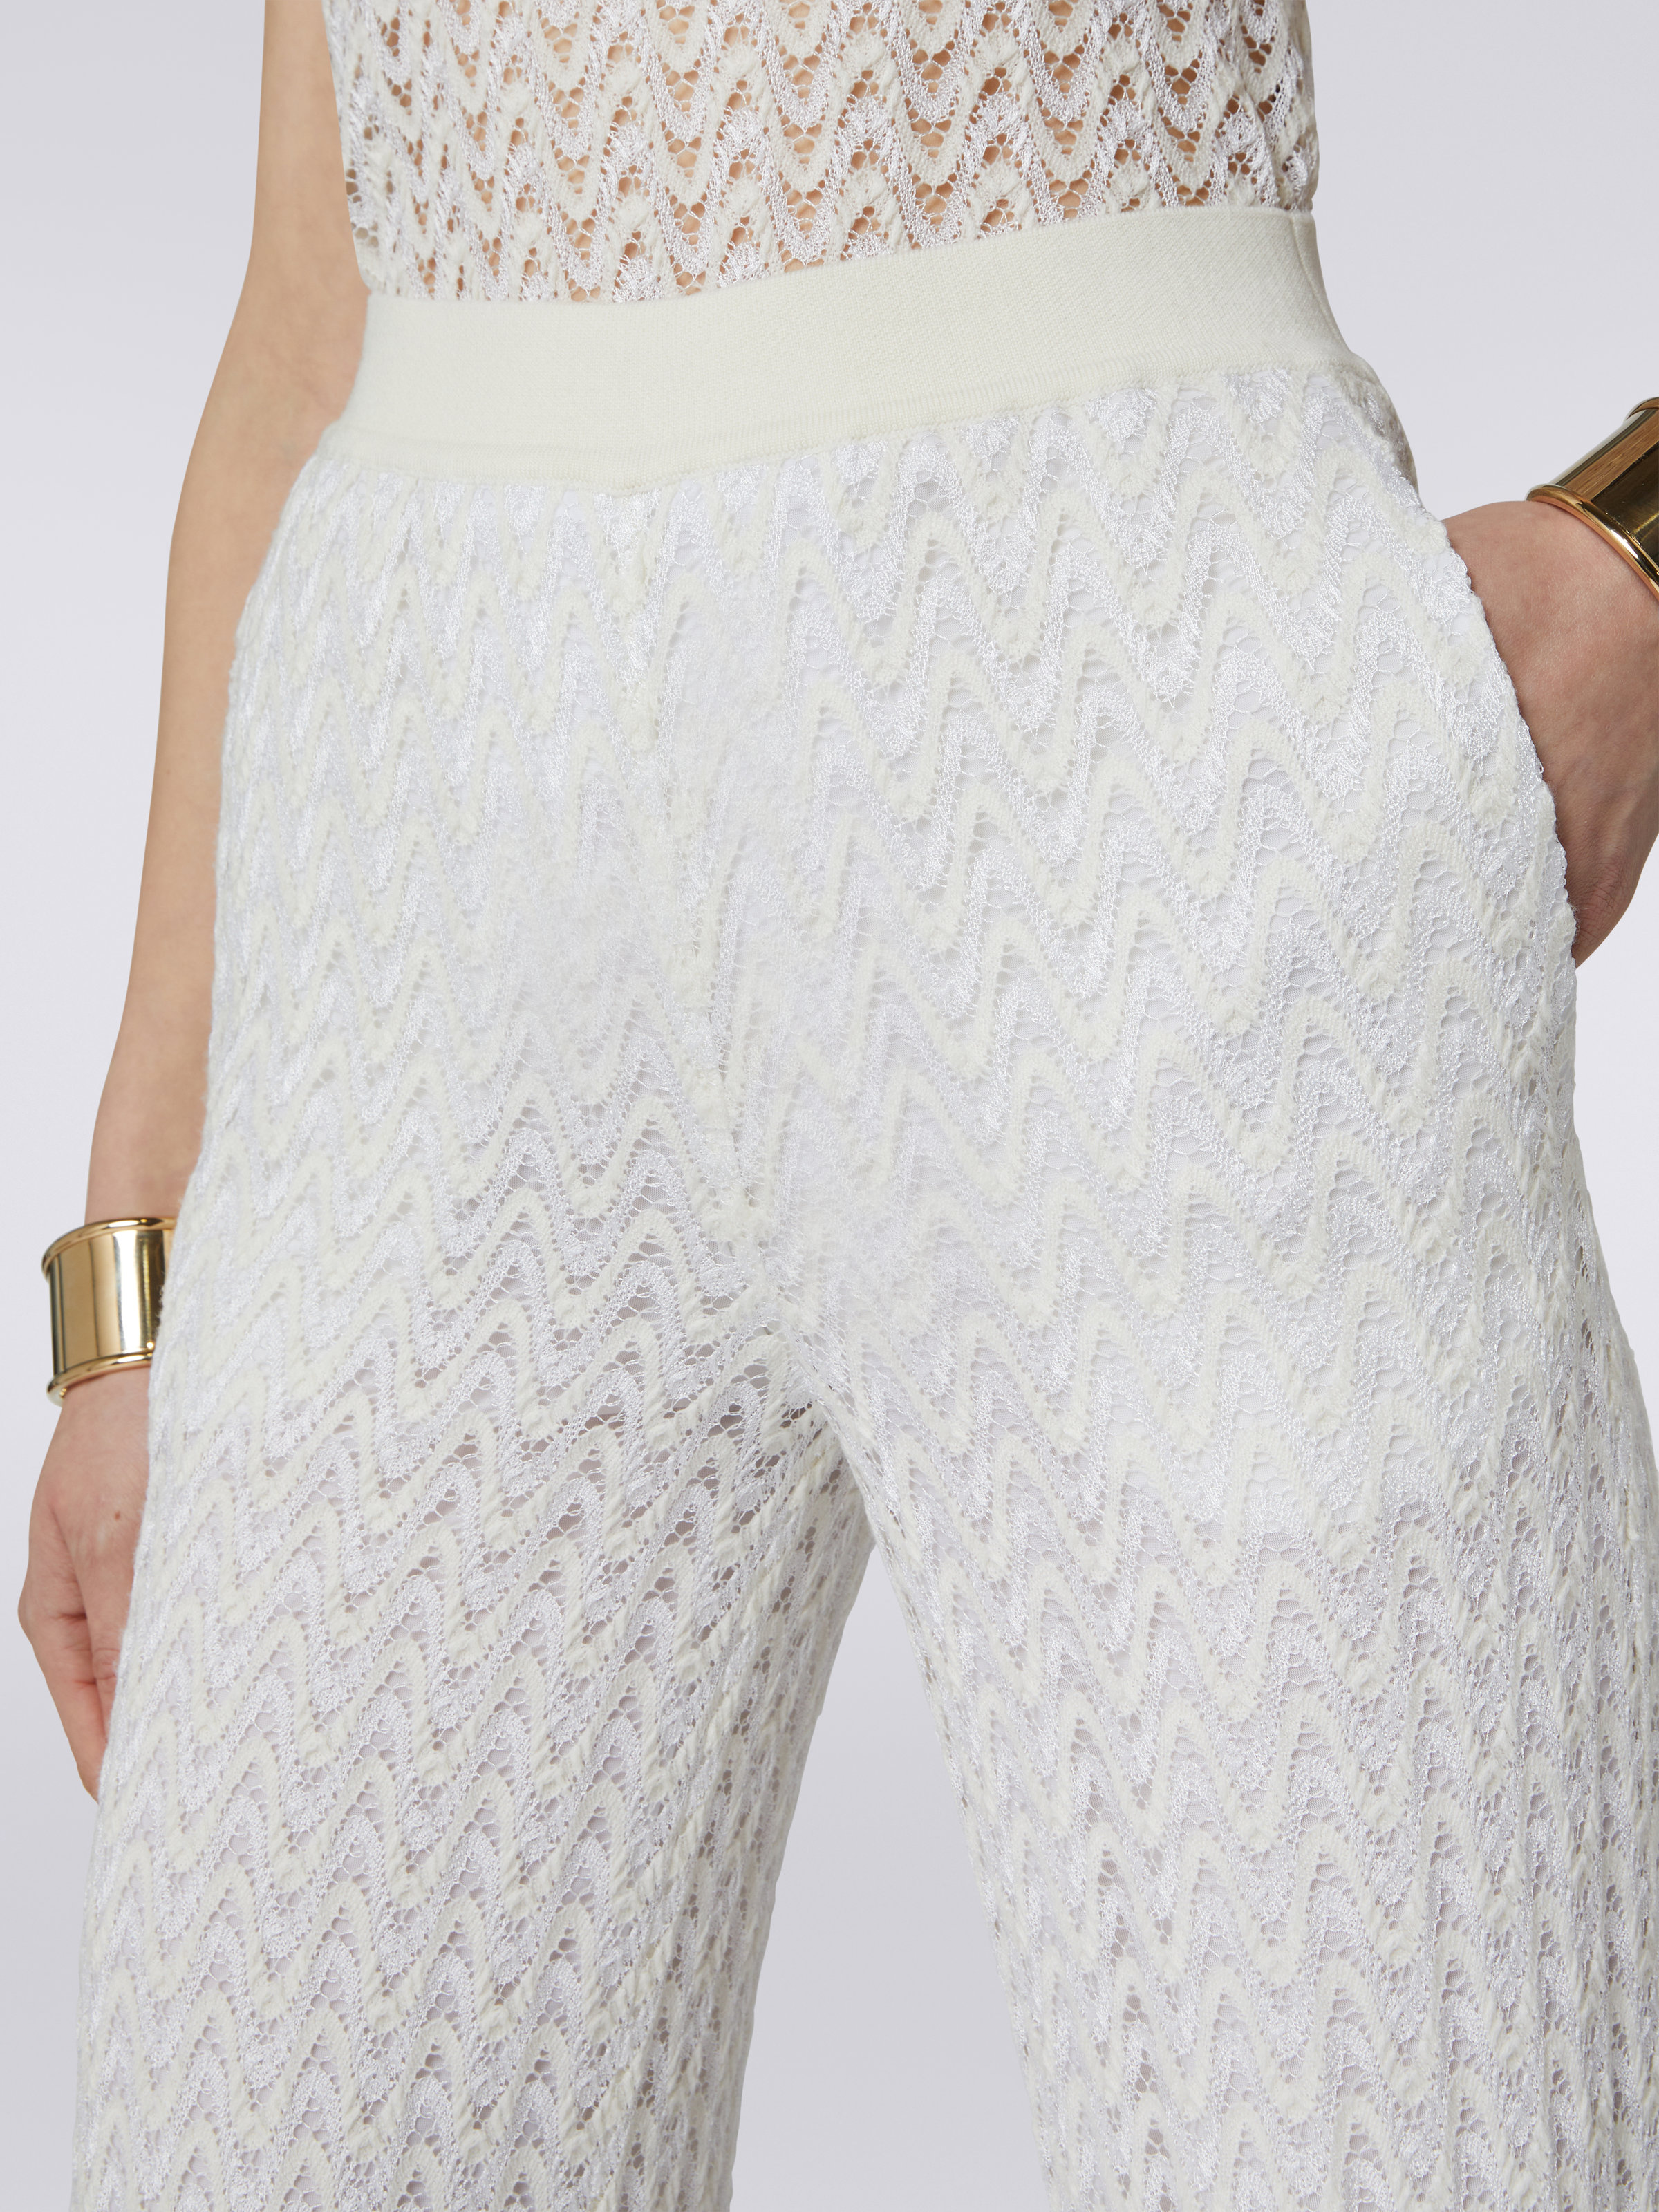 Palazzo pants in raschel knit wool and viscose, White  - 4